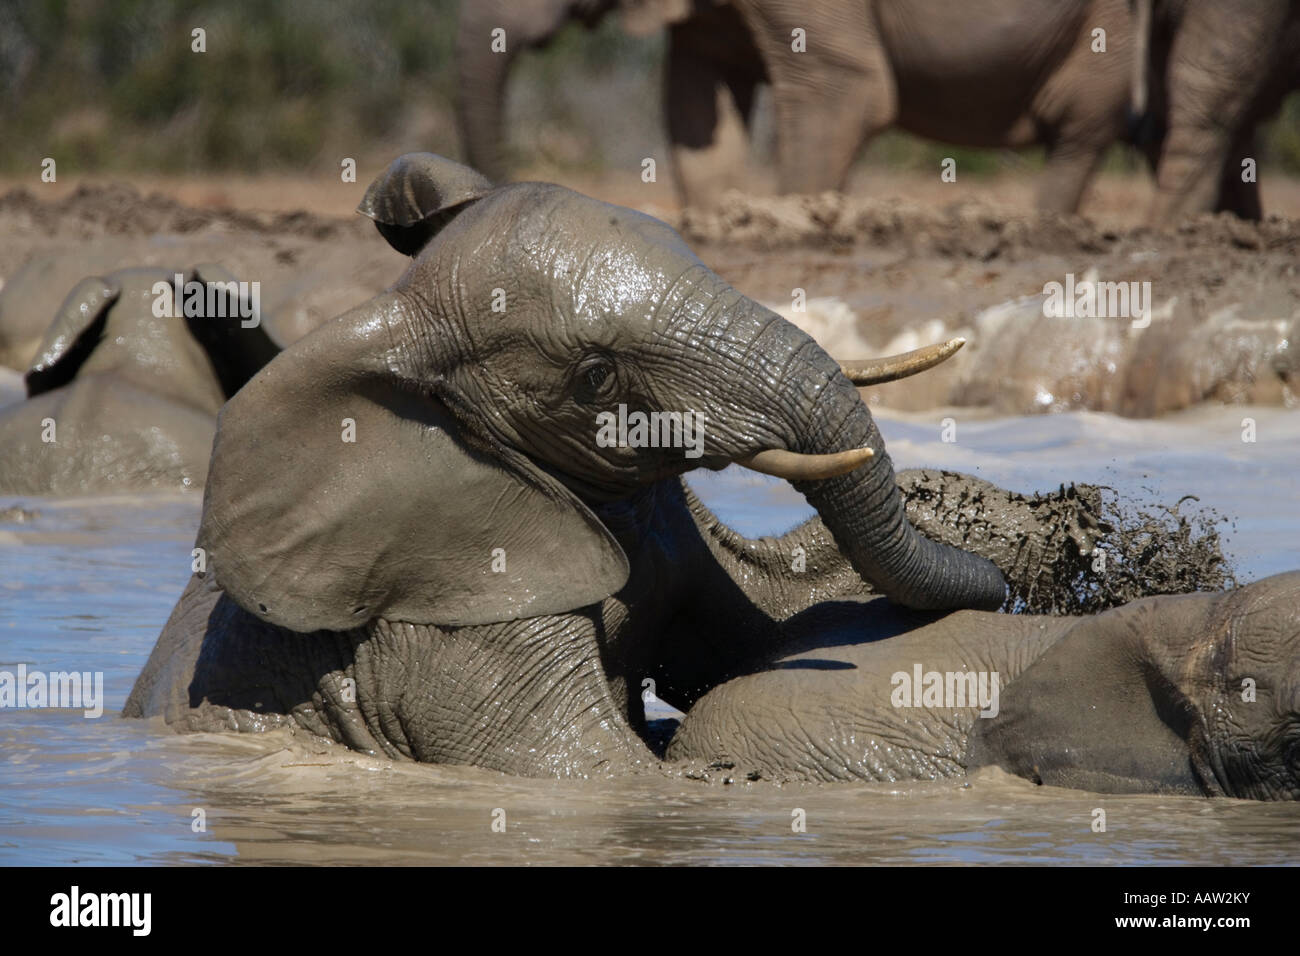 African elephants Loxodonta africana in water Addo Elephant National Park South Africa Stock Photo